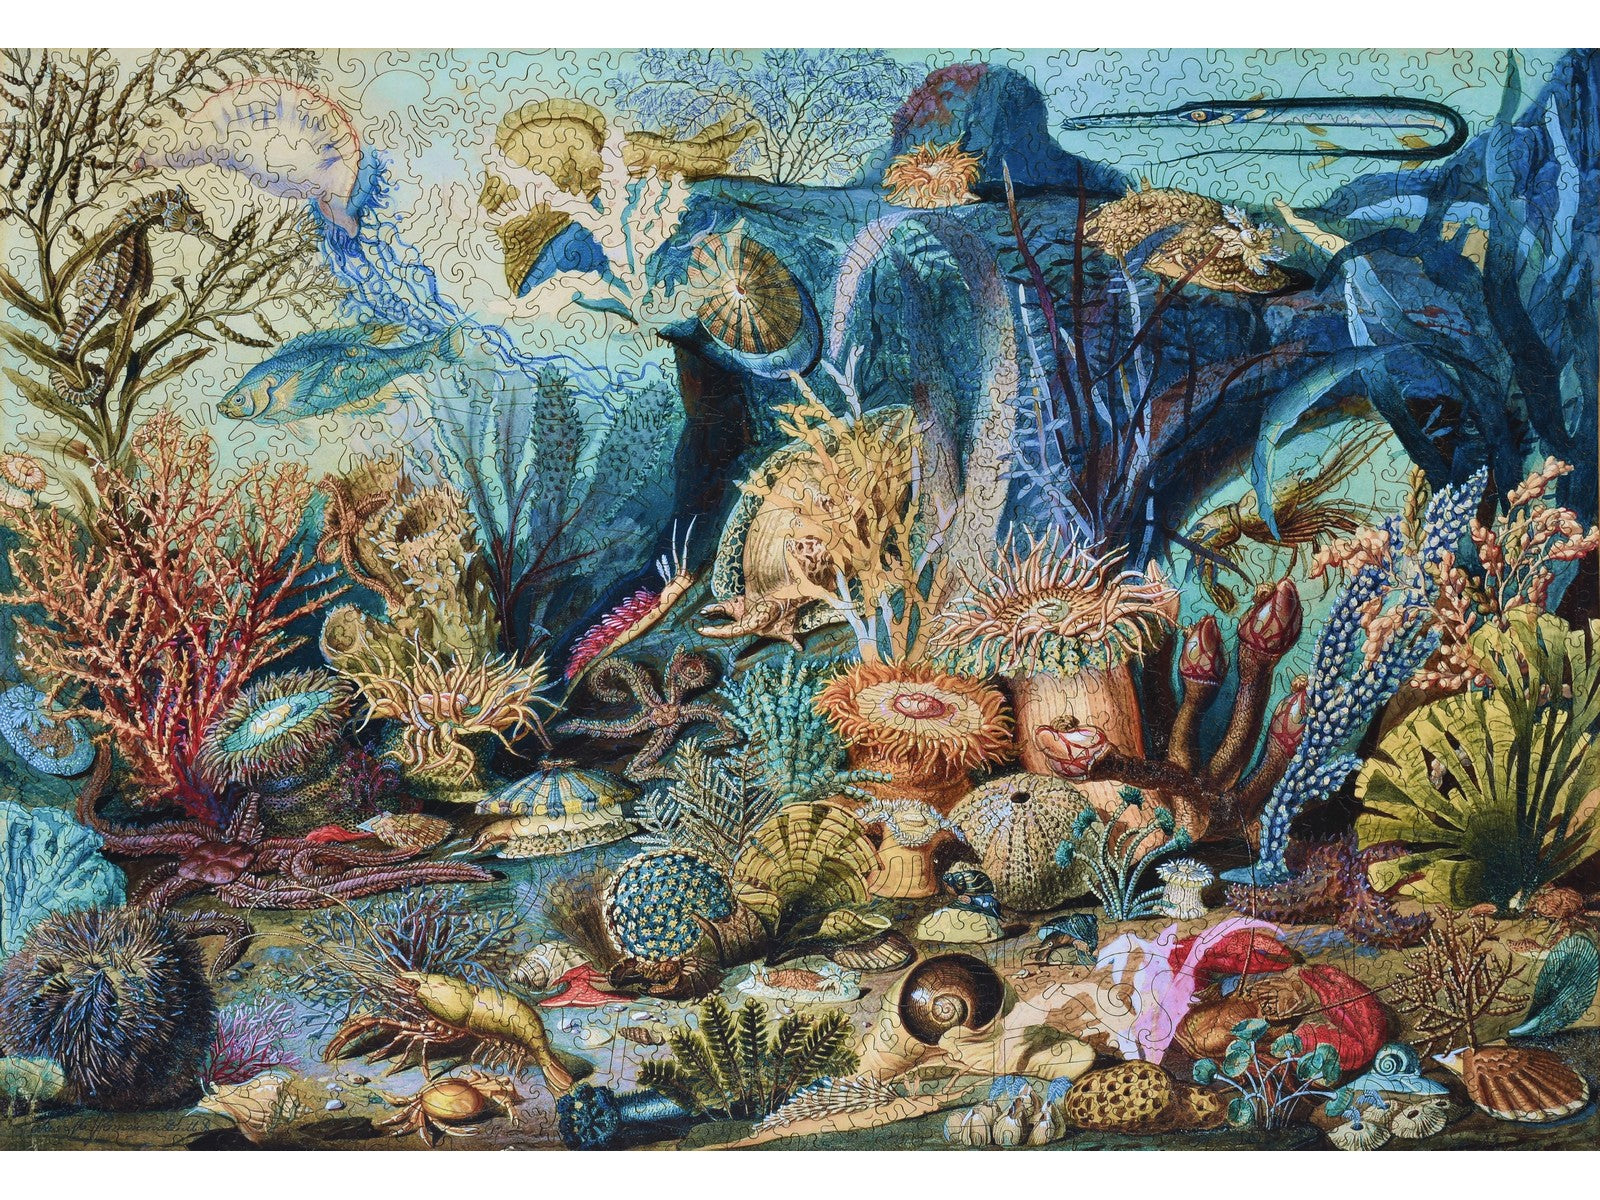 The front of the puzzle, Ocean Life, which shows an underwater scene with many sea creatures.